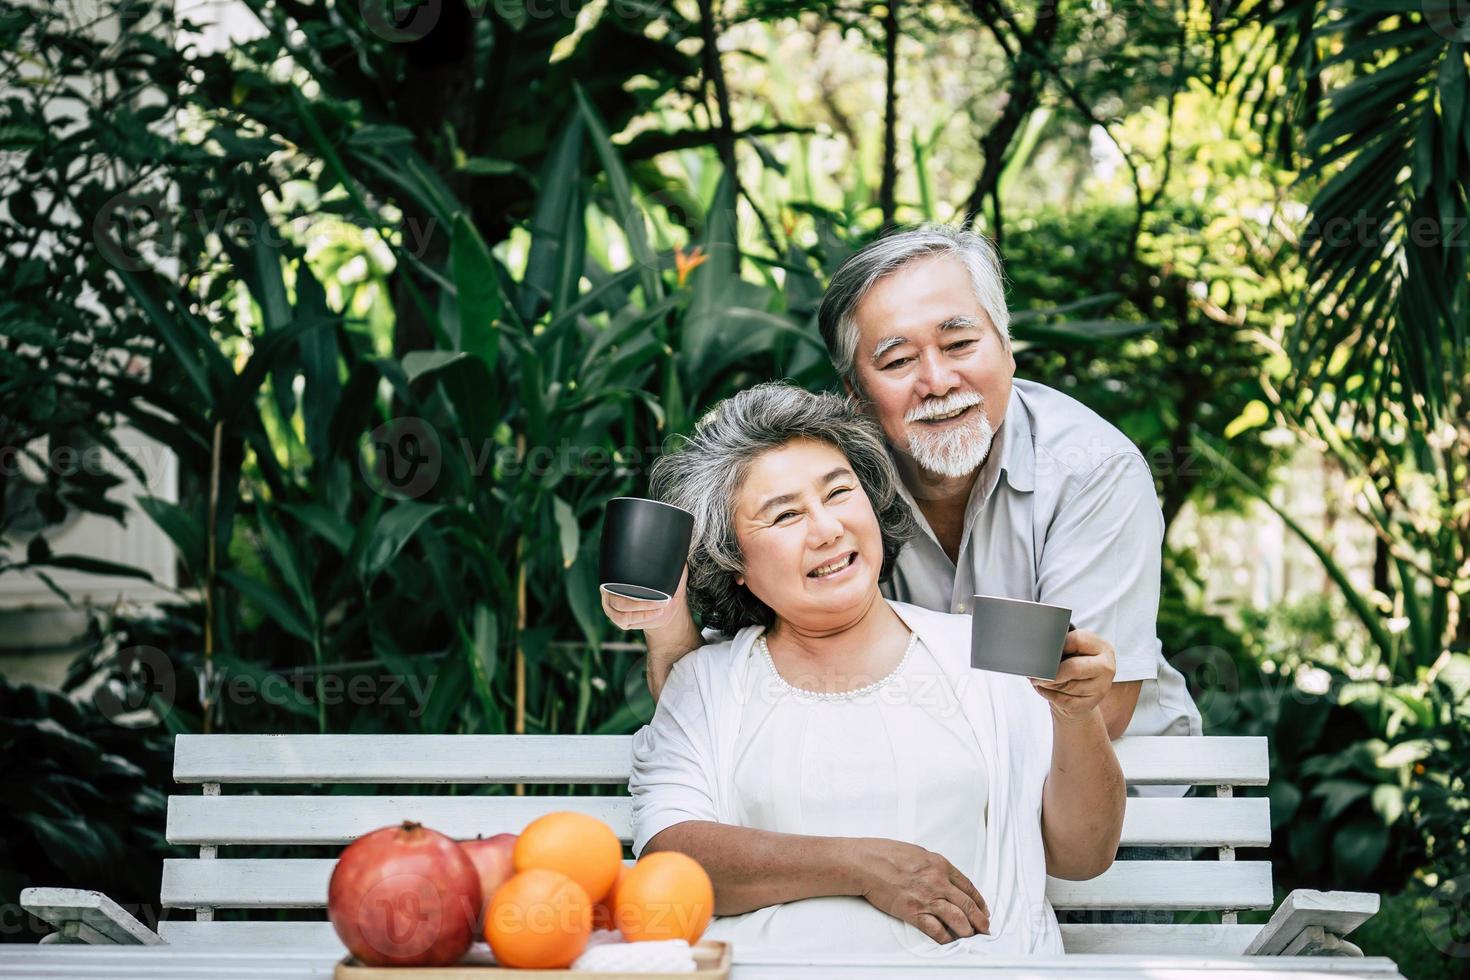 Elderly couple playing and eating some fruit photo